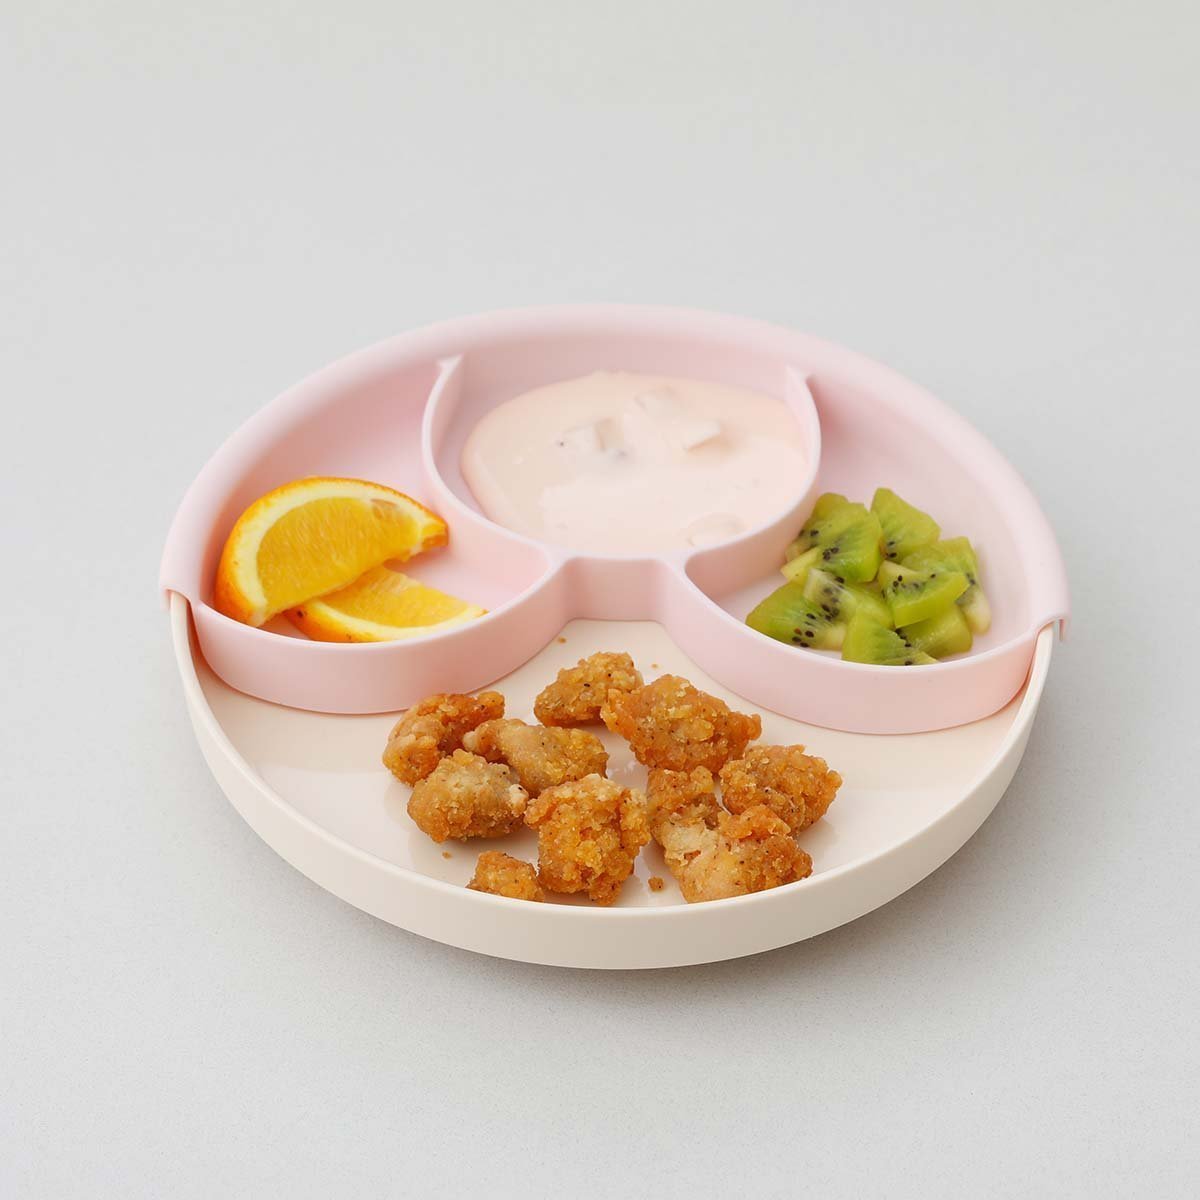 Miniware Healthy Meal Suction Plate with Dividers Set-Grey/Cotton Candy - MWHMGC